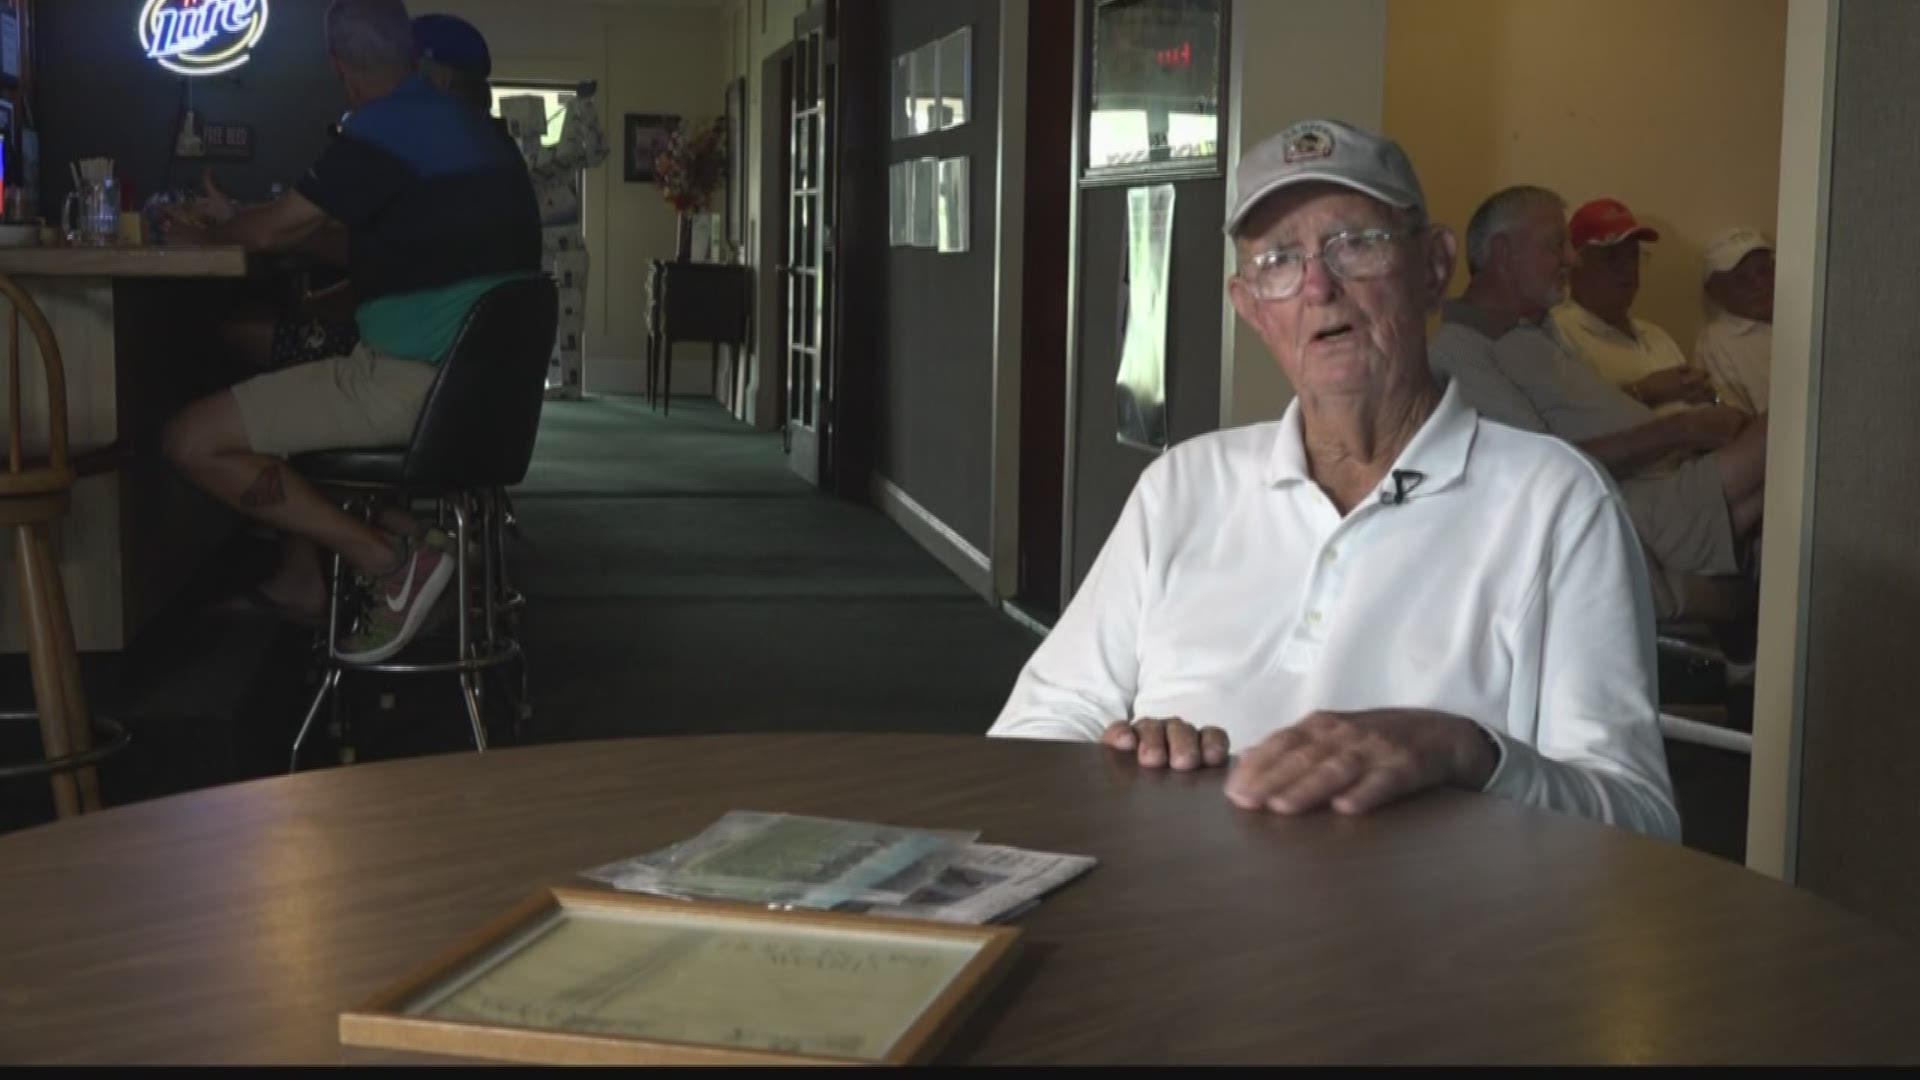 Gus Elison, a 92-year-old Navy veteran, probably plays more golf than you. He's also really good at getting a hole in one, based on his track record.